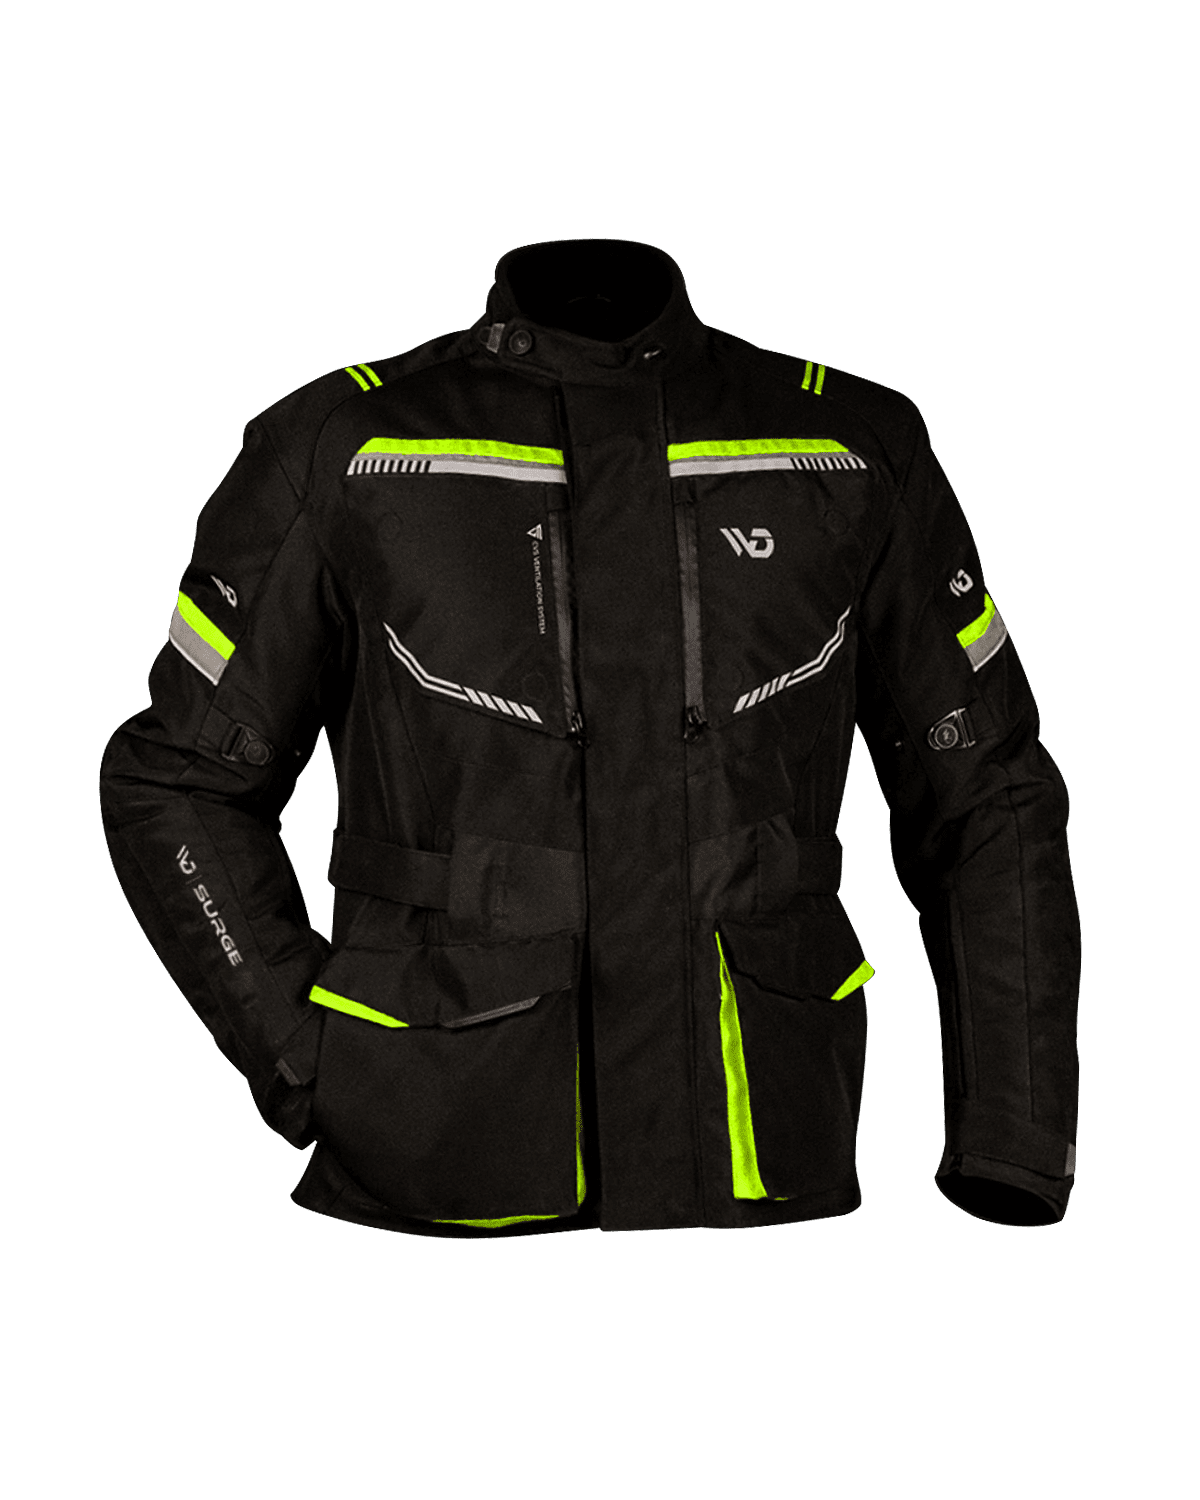 Men Jacket - WD Motorsports | Shop Motorcycle Suits Leather Jackets and Accessories